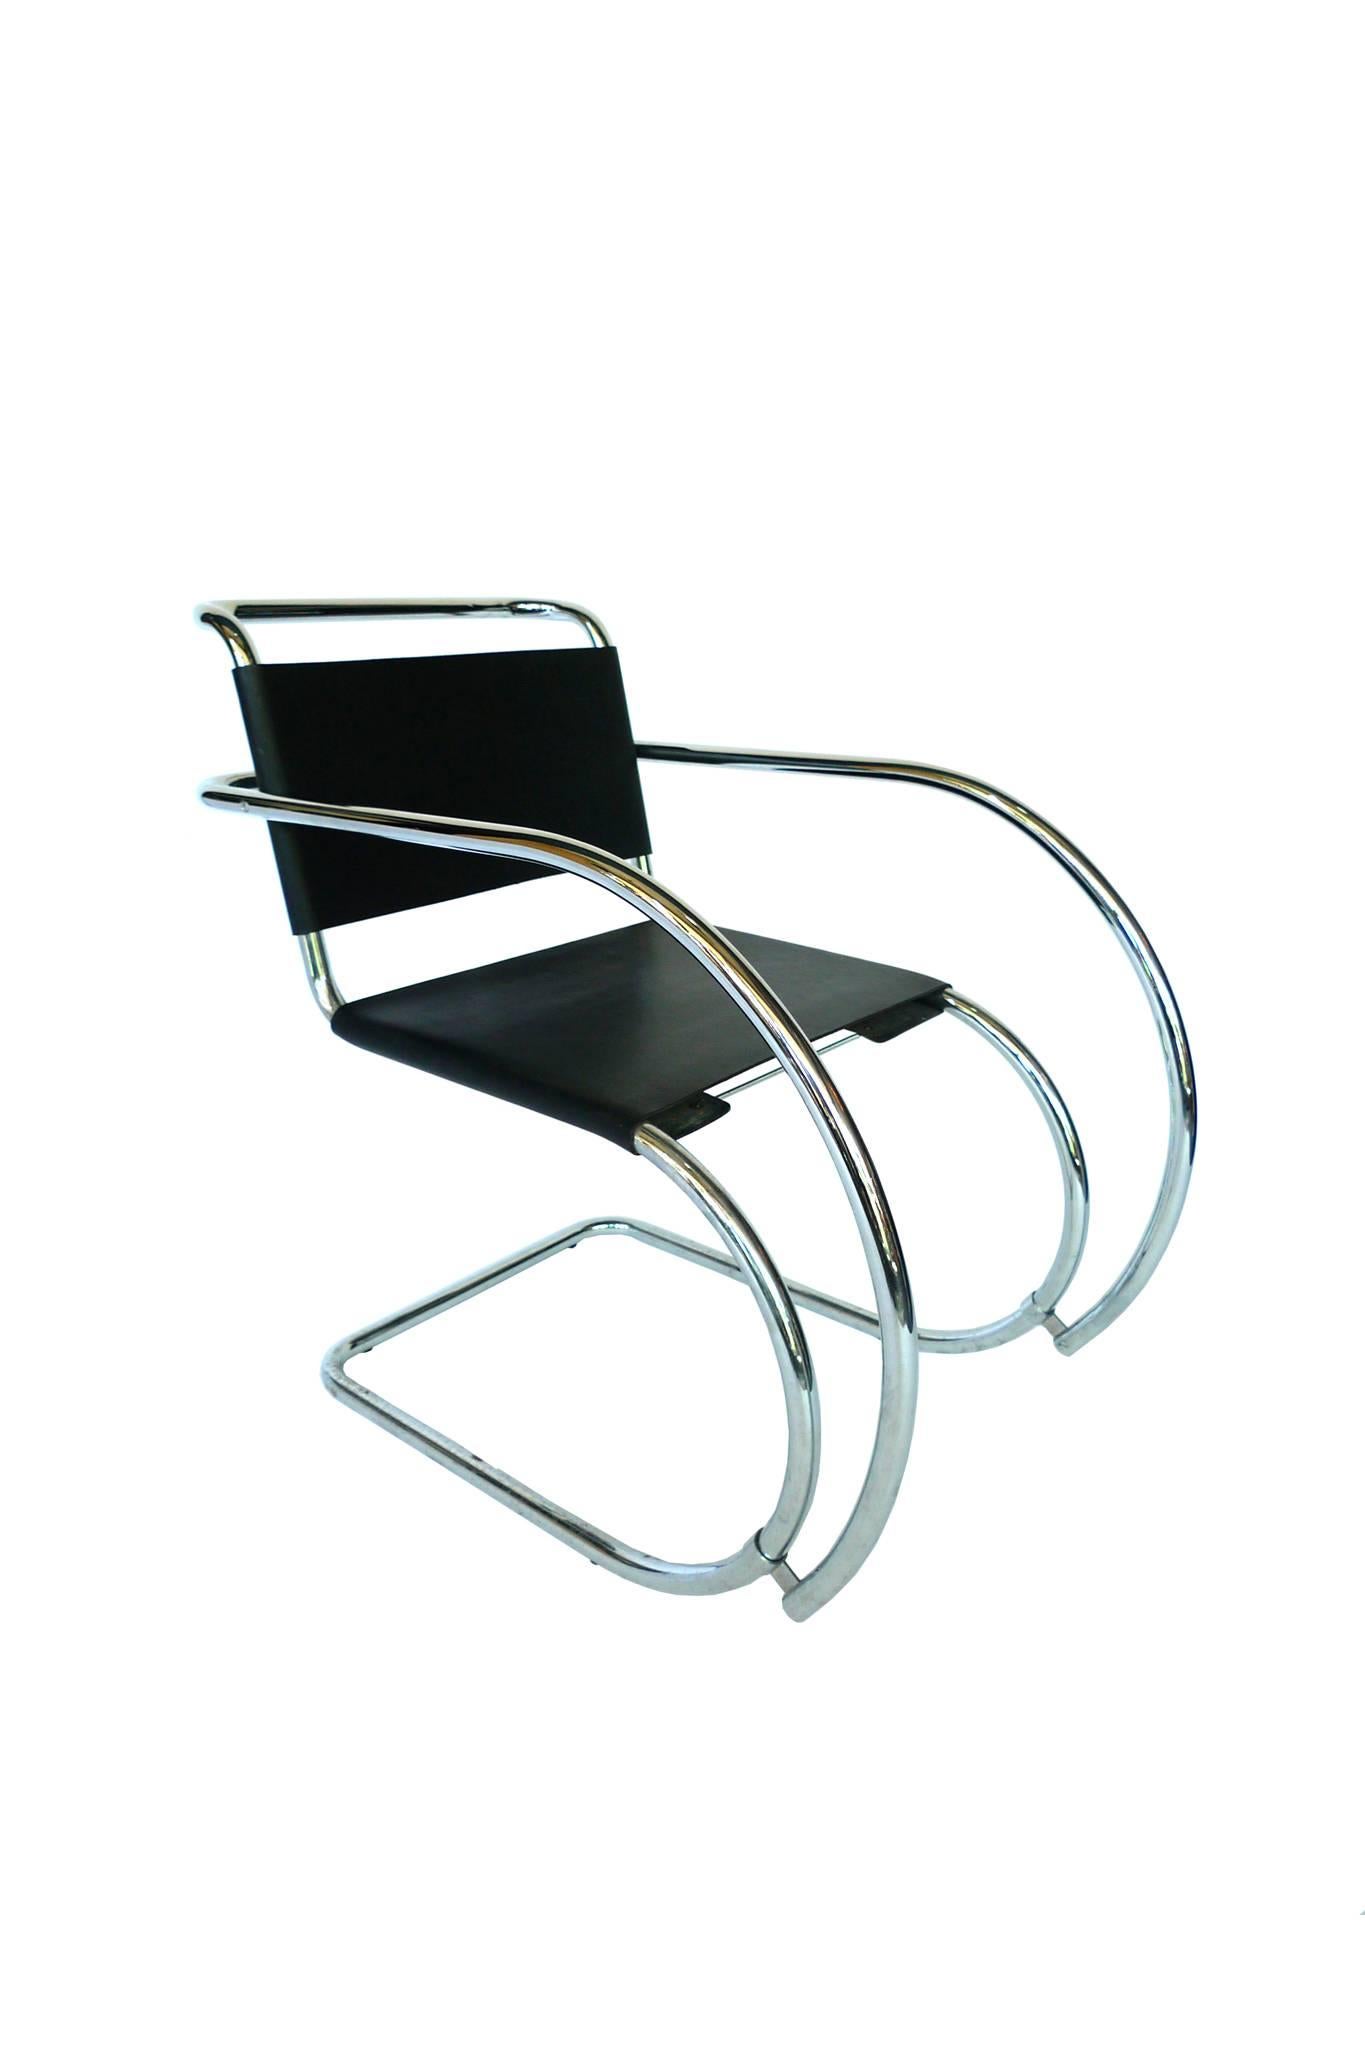 These MR chairs, designed in the 1920s by Mies van der Rohe, employ a curved chrome-plated tubular steel frame. The design is an innovative cantilever that offers wide seating. The seat and back are constructed from leather, which is wrapped around